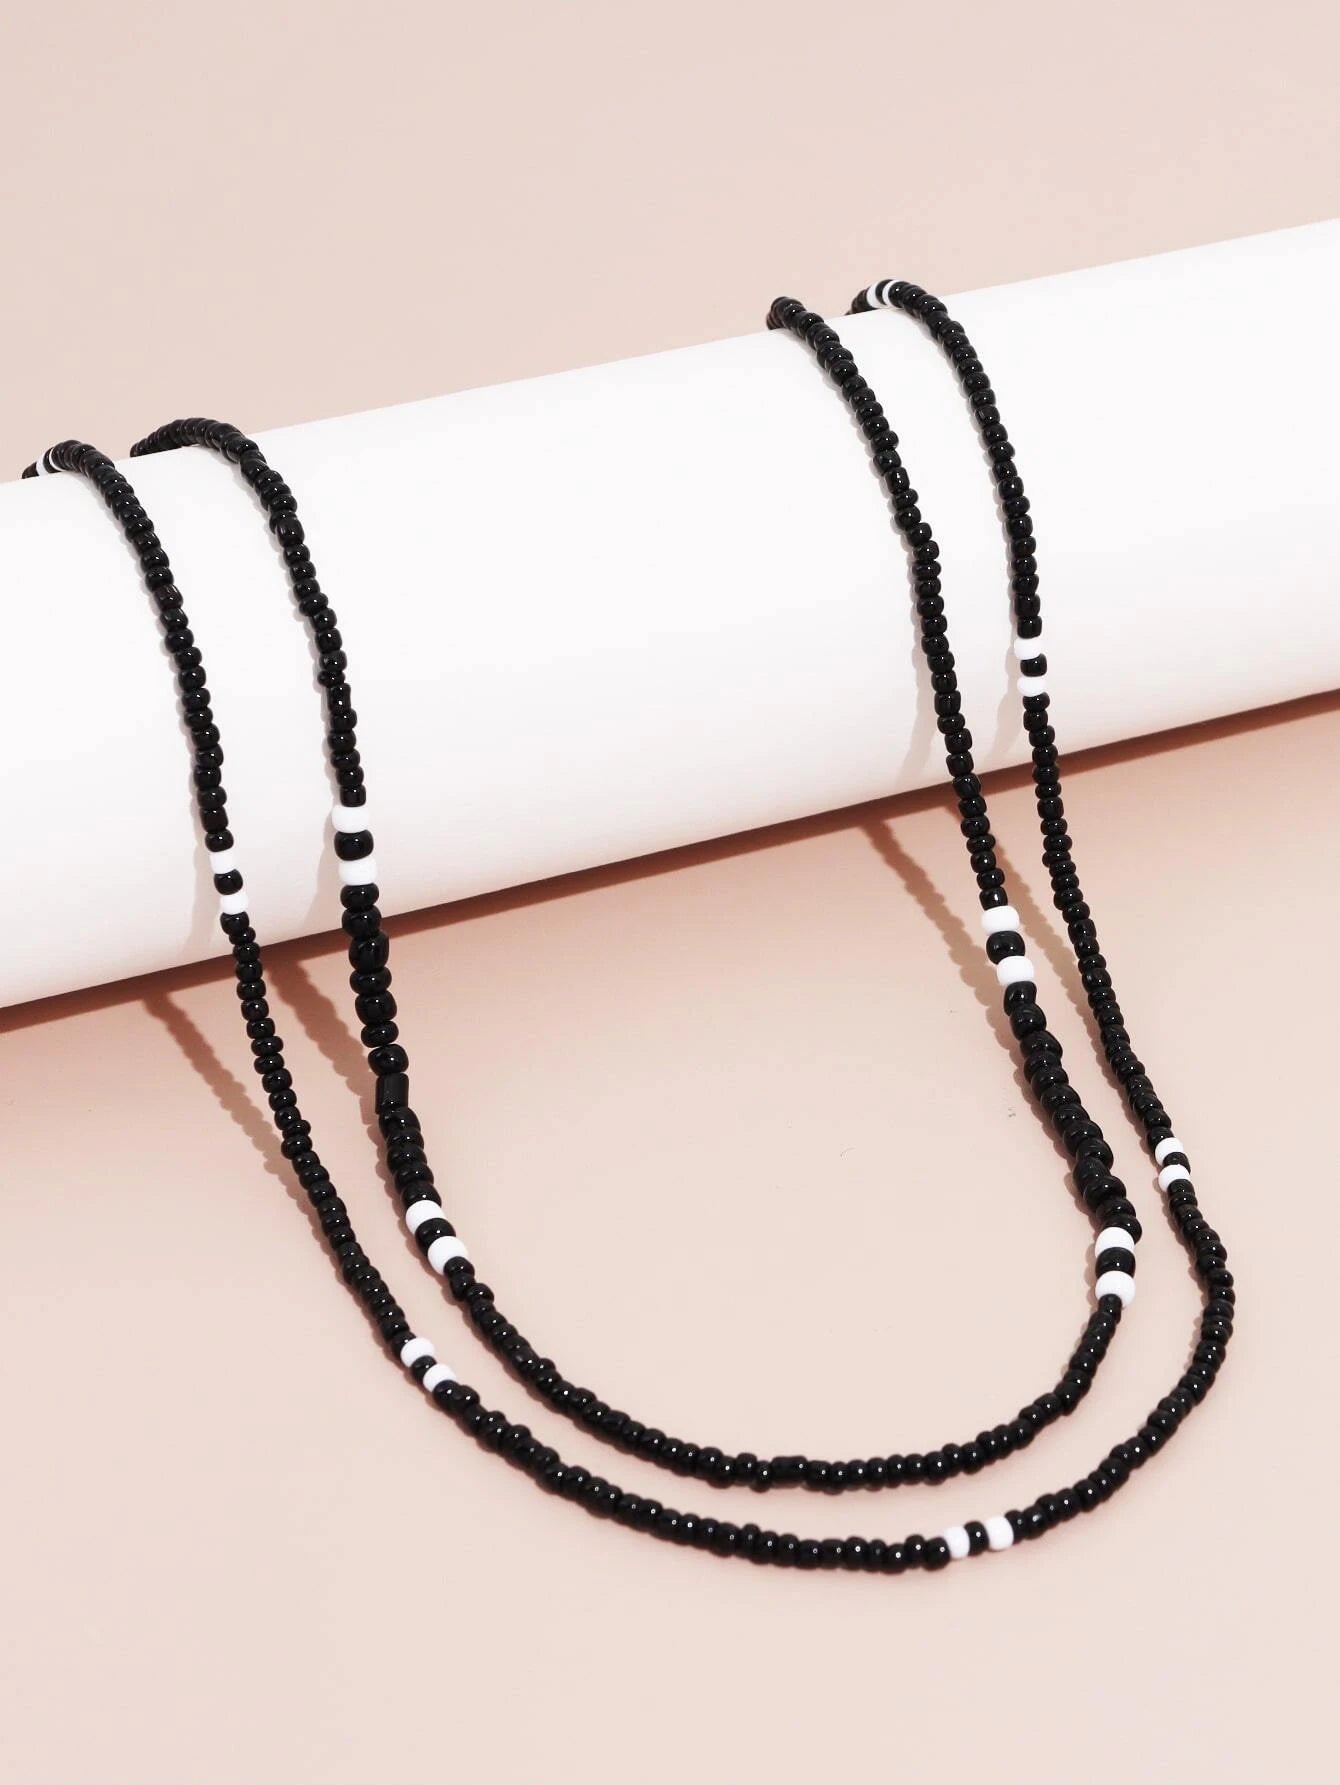 Customized Double-Layered Black Beaded Waist Chain with Rice Beads for Women, Ideal for Beach Parties, as Body Jewelry Gift